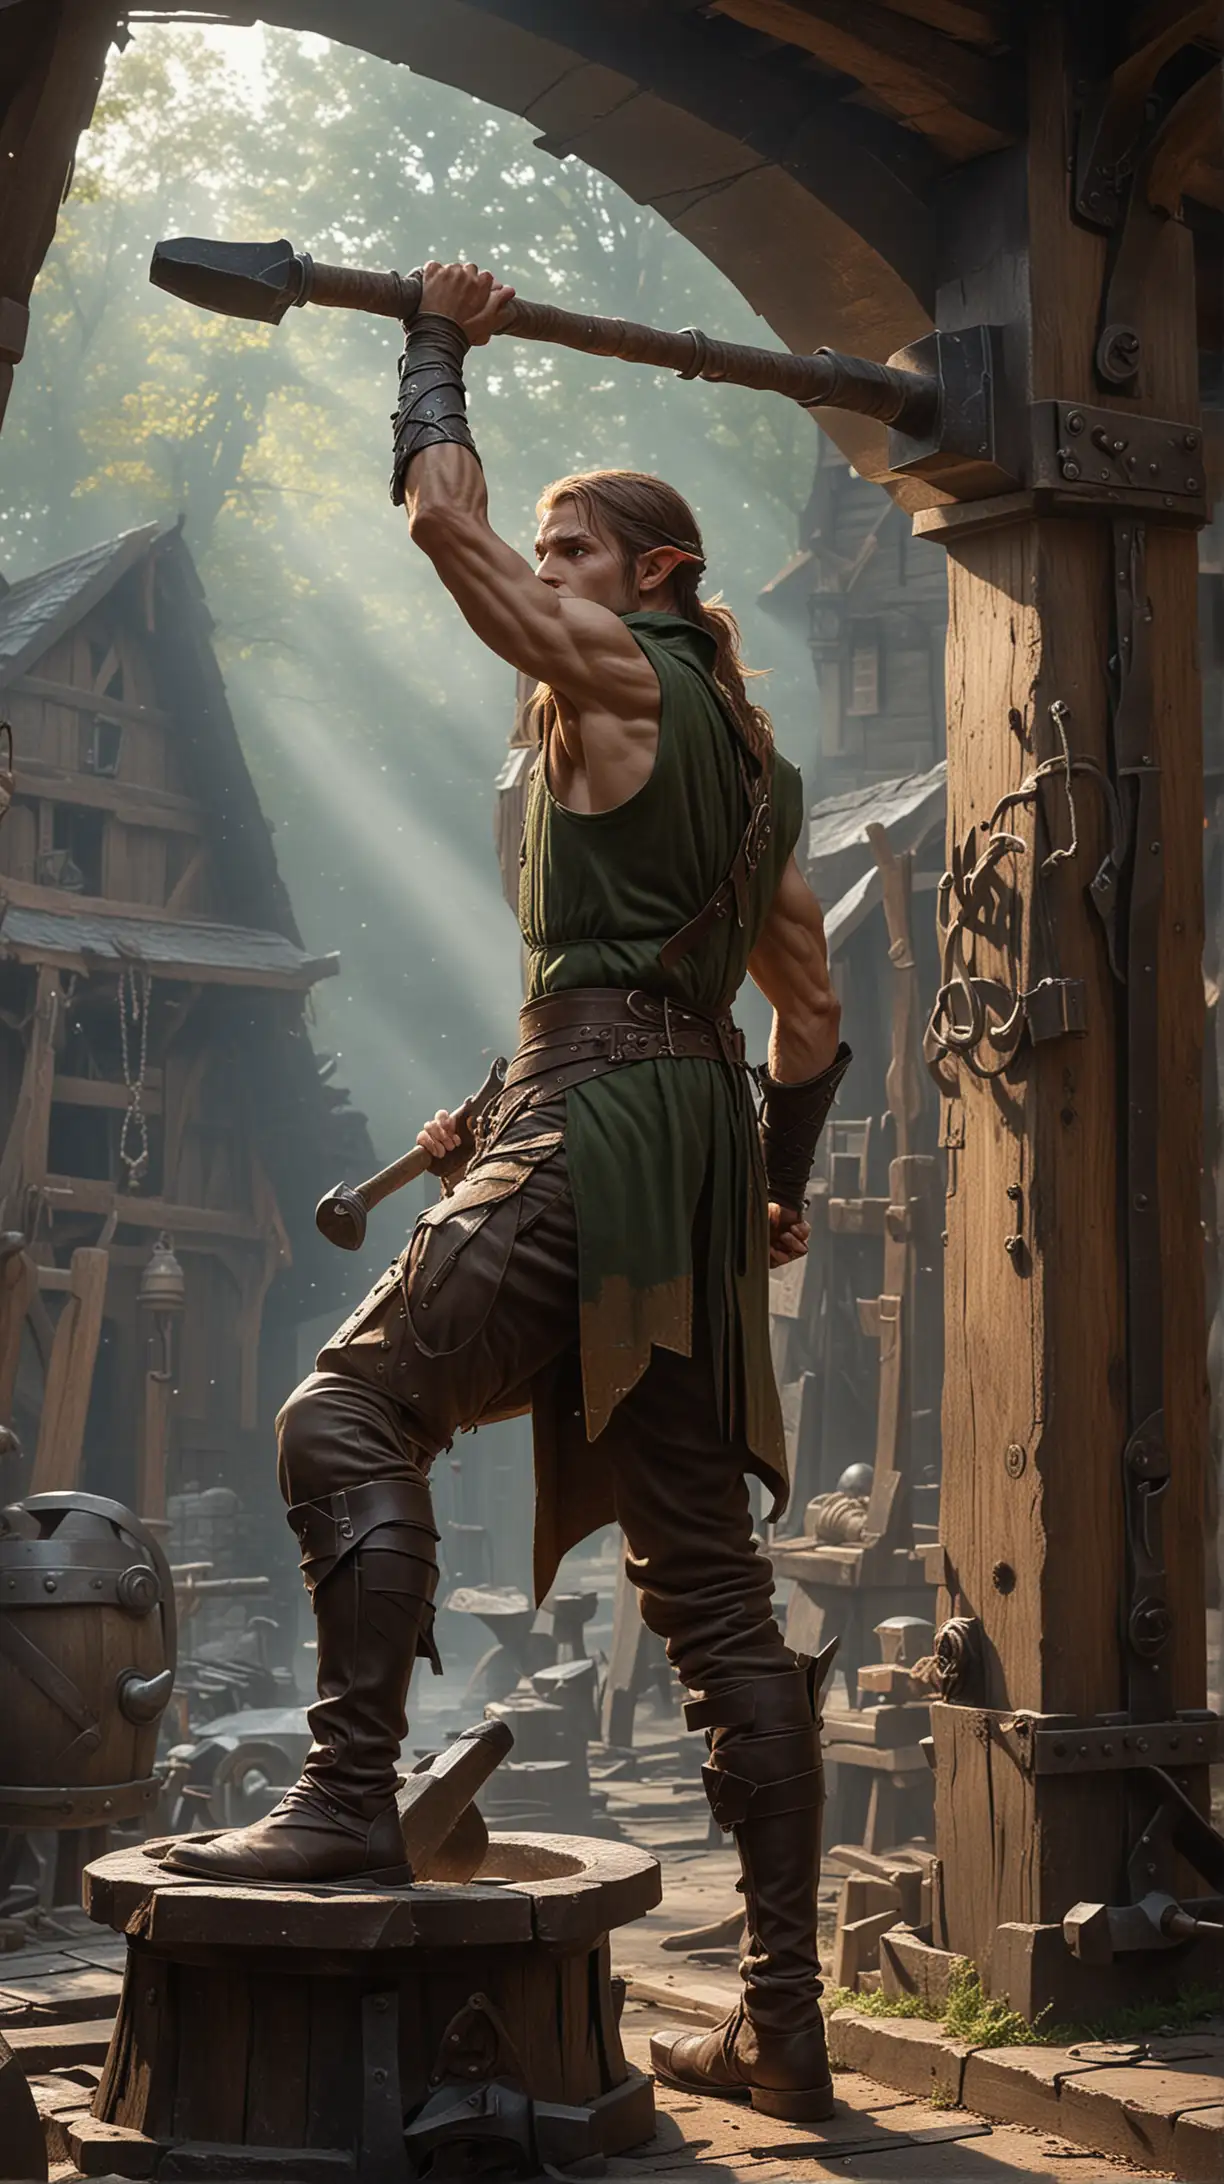 In a fantasy setting, A tall strong wood elf swings a large hammer over his anvil in a blacksmith forge.